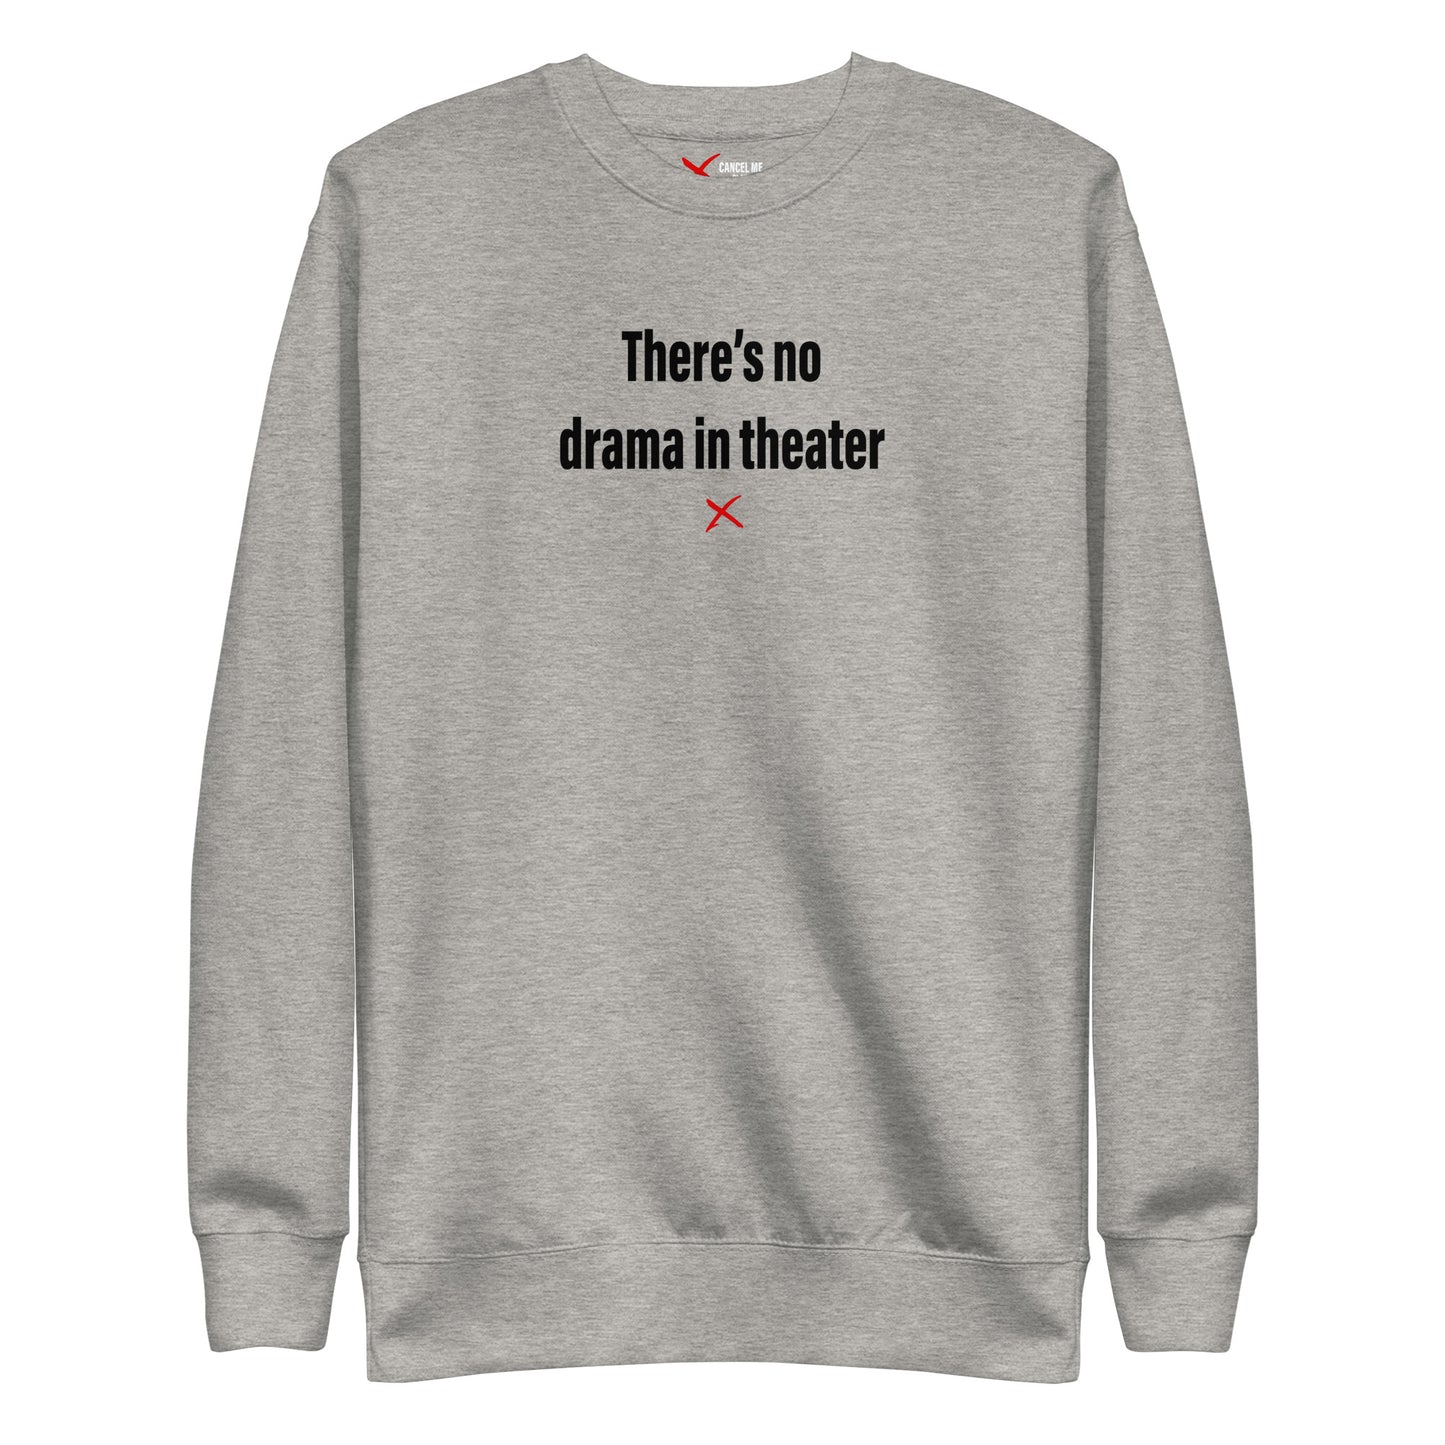 There's no drama in theater - Sweatshirt